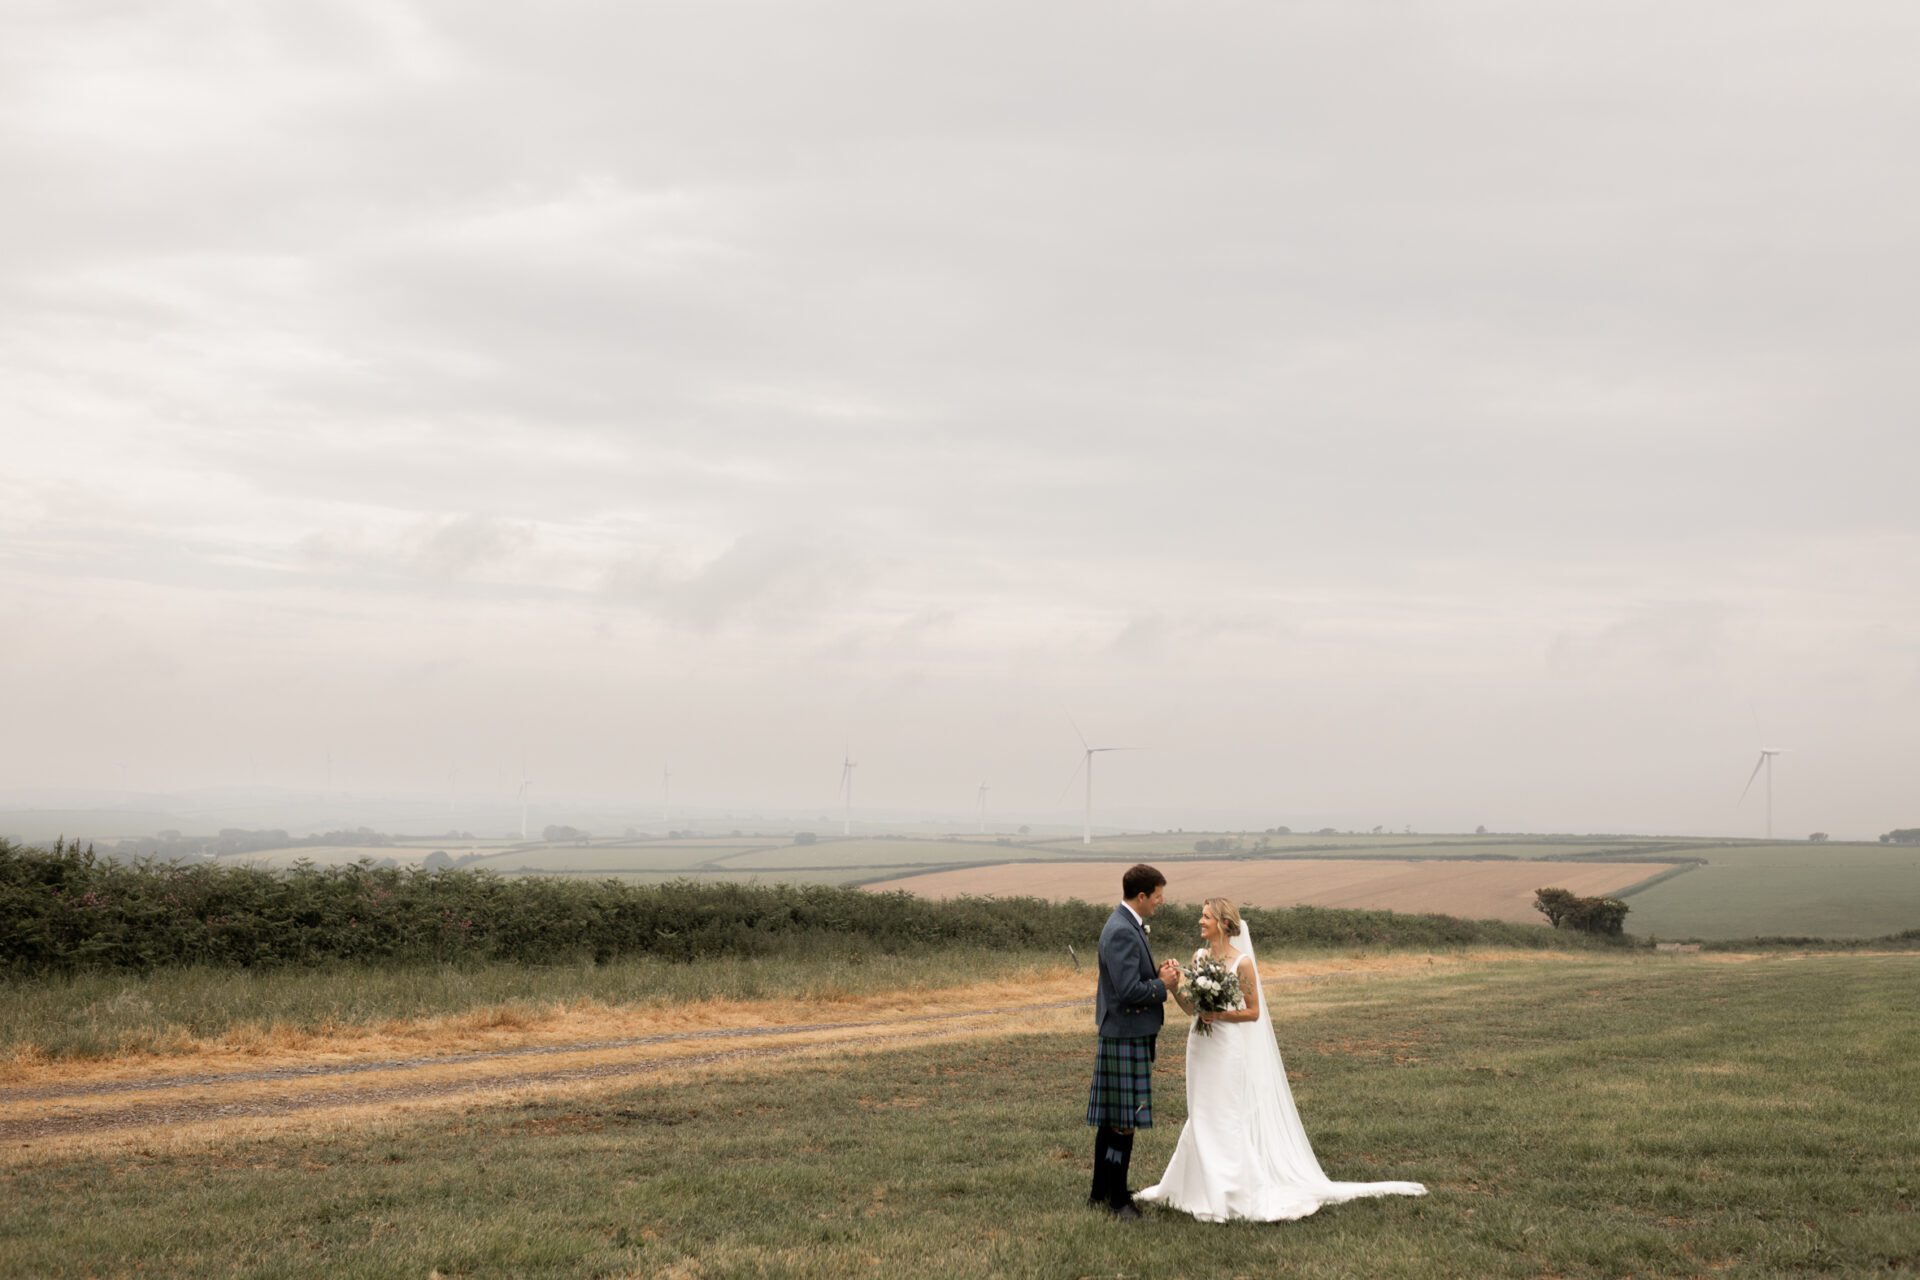 The bride and groom pose for couples photos in the Devon countryside